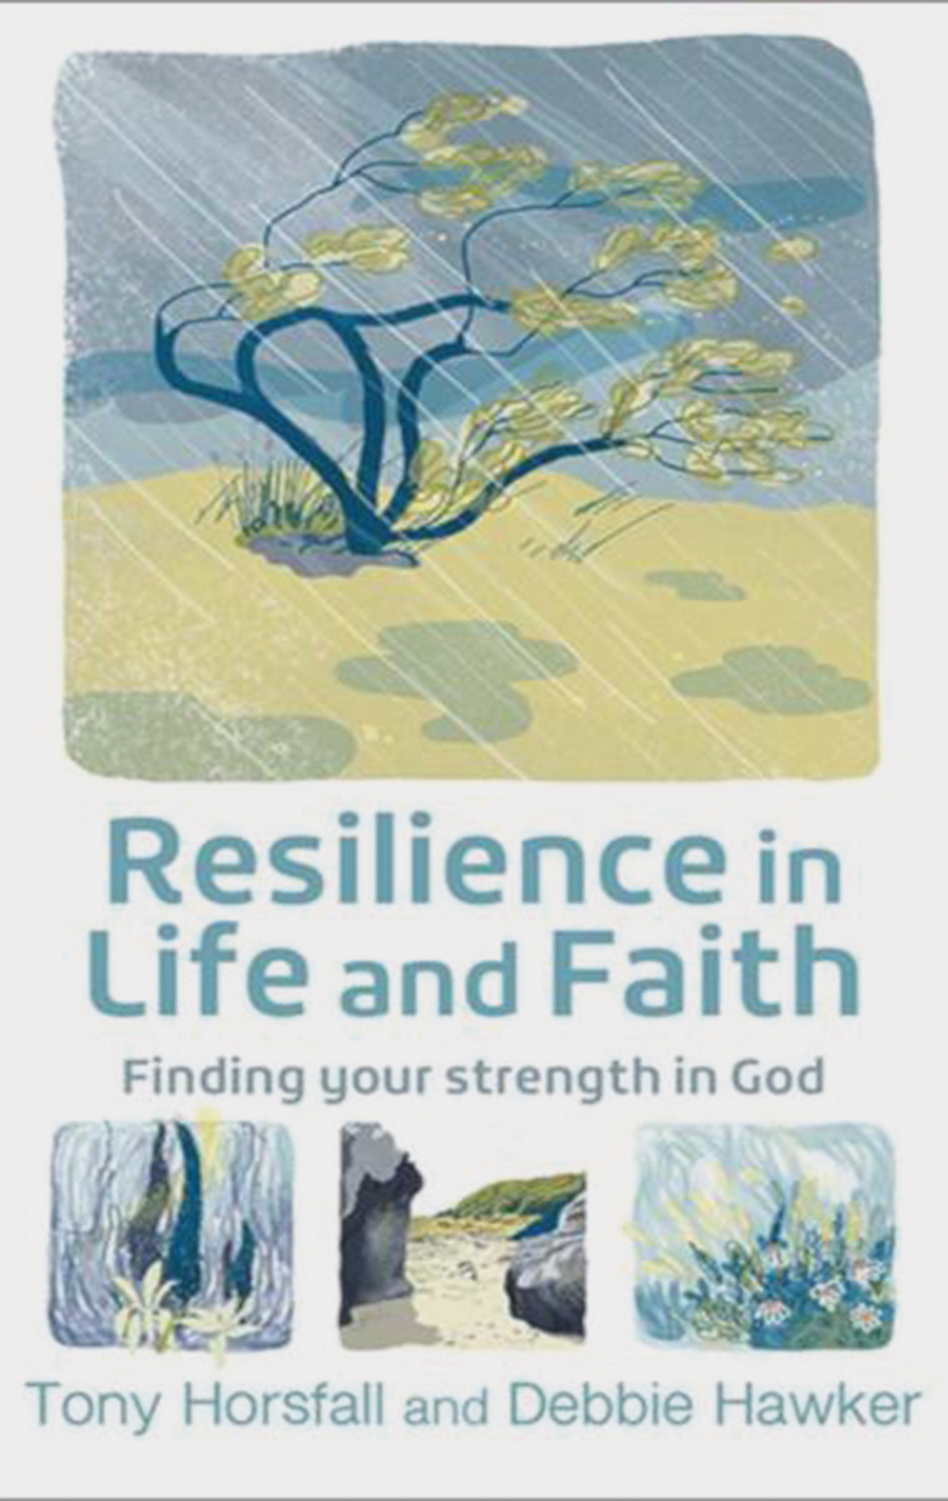 Resilience in Life and Faith